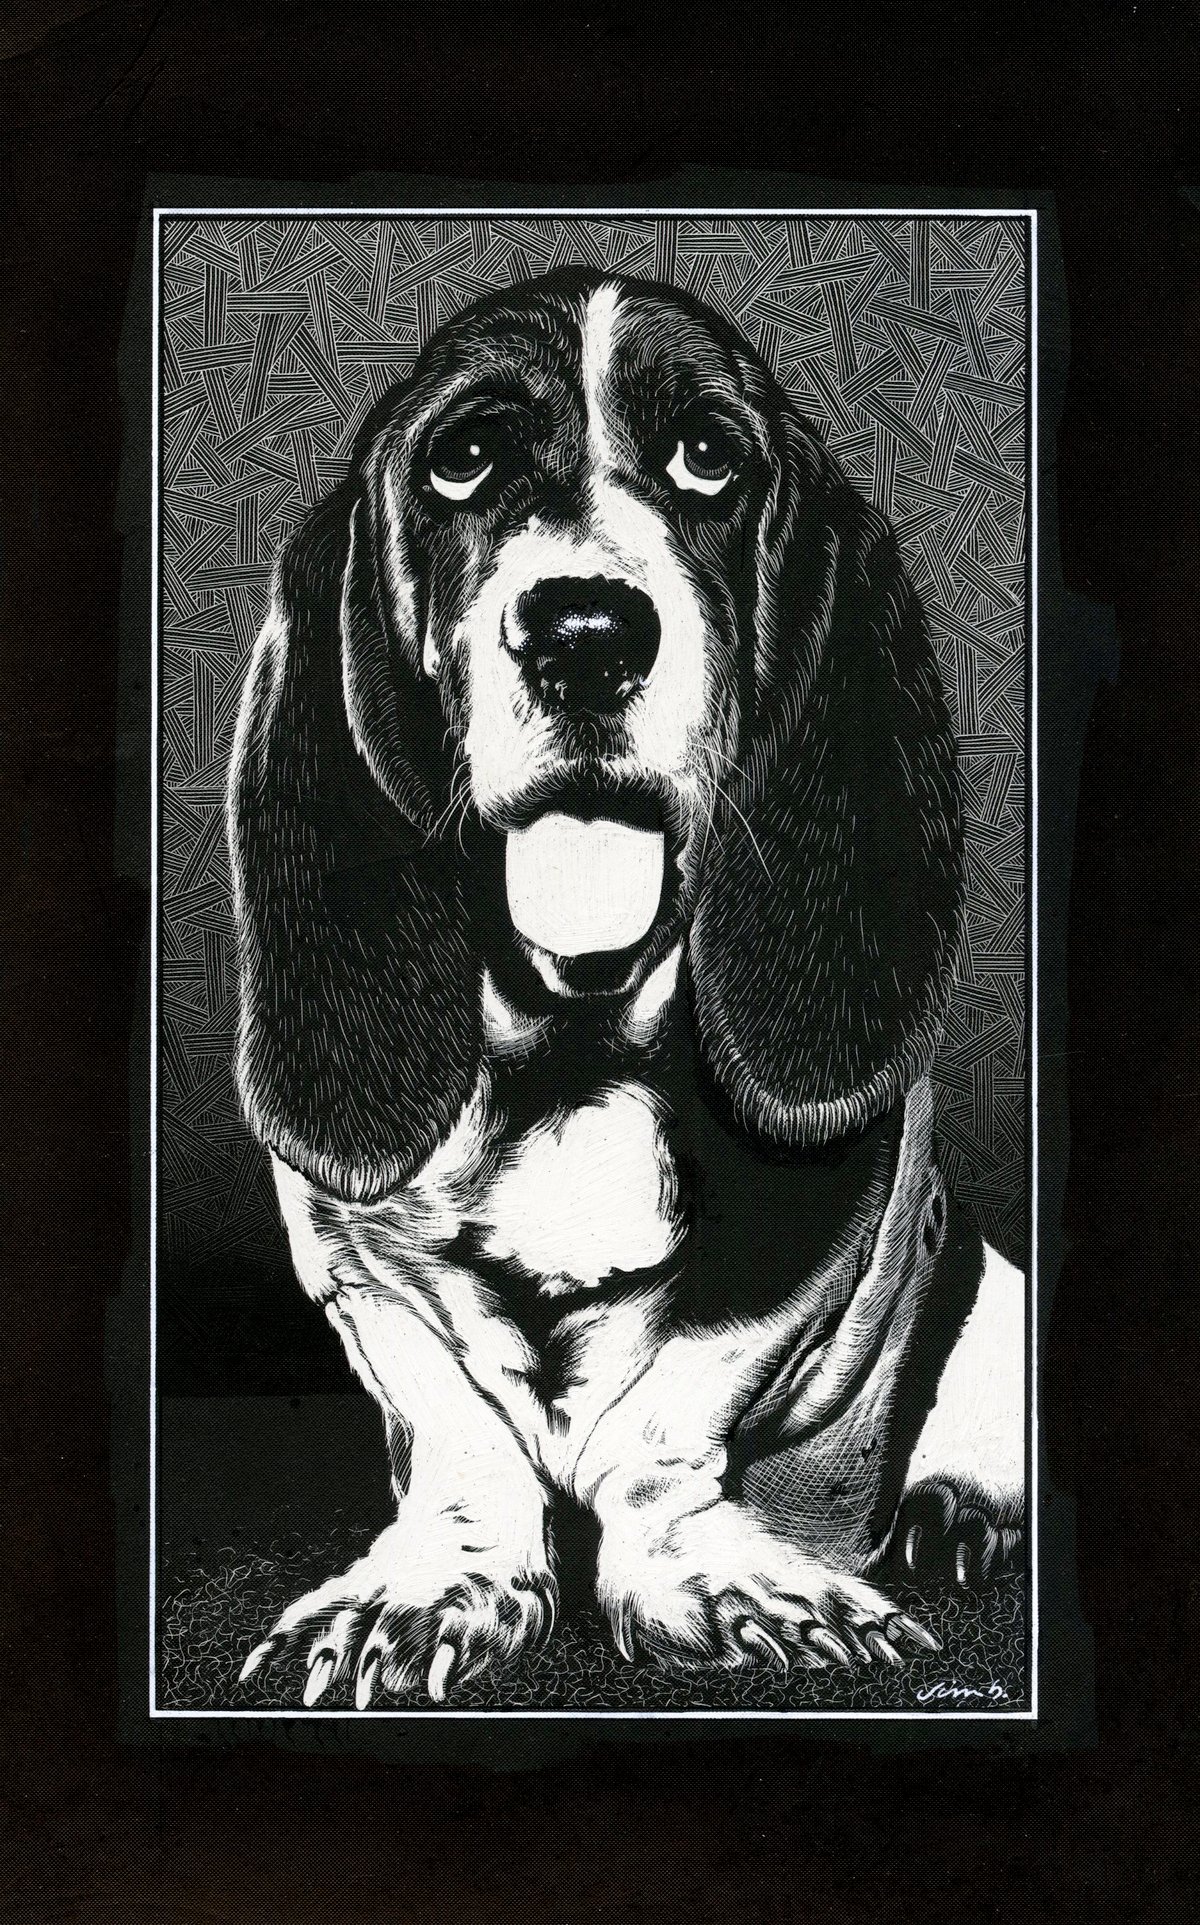 https://assets.bigcartel.com/product_images/270254348/basset+hound+01.jpg?auto=format&fit=max&w=1200